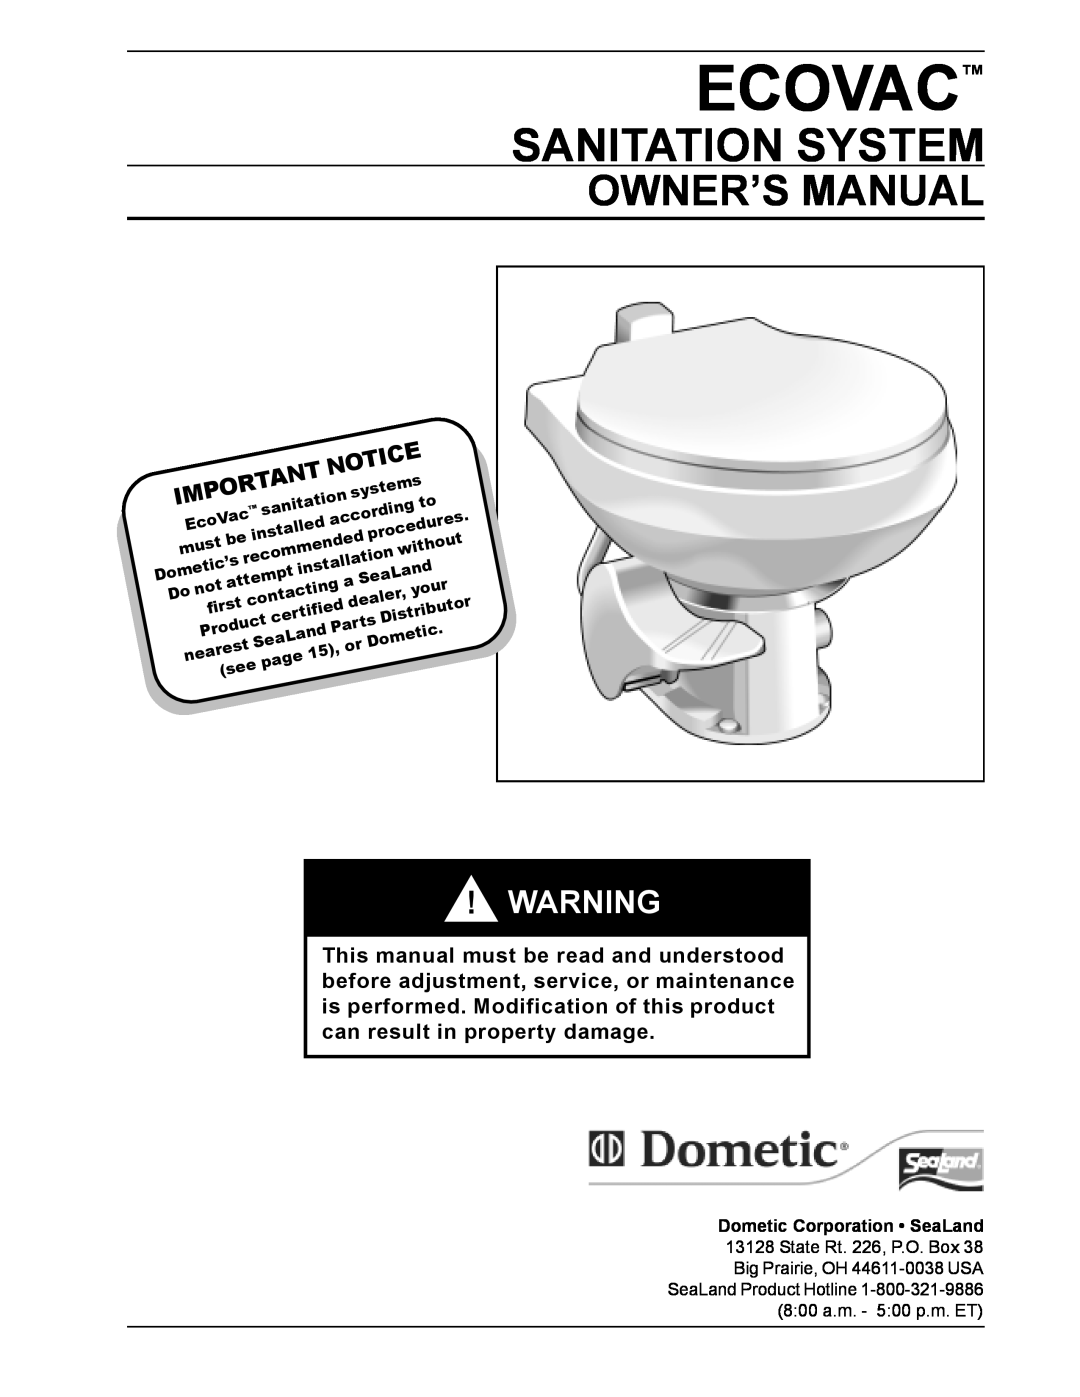 Dometic SANITATION SYSTEM owner manual Ecovac, Sanitation System, Dometic Corporation SeaLand 